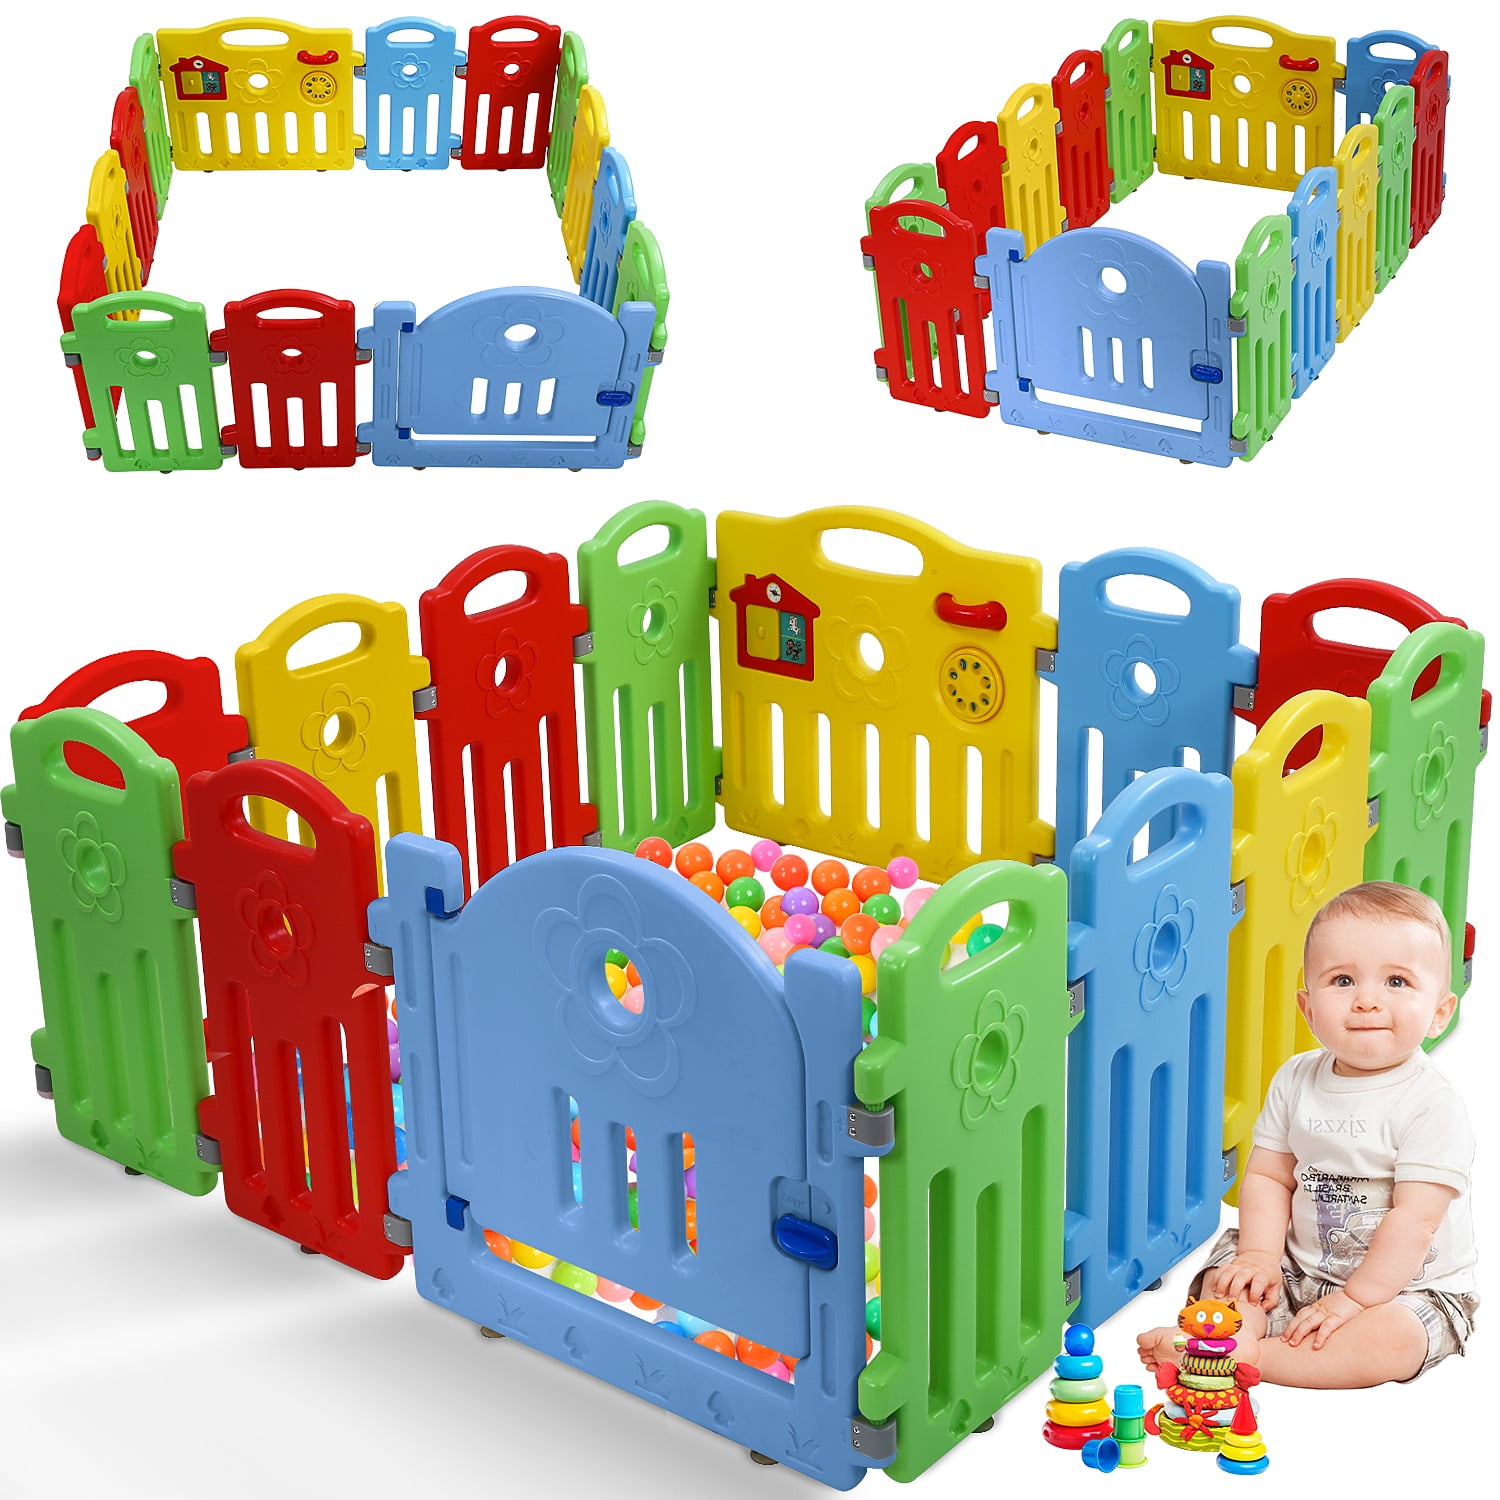 14 Panels, Blue Baby Playpen for Babies Baby Play Playards 14/18 Panels Infants Toddler Safety Kids Play Pens Indoor Baby Fence with Activity Board 